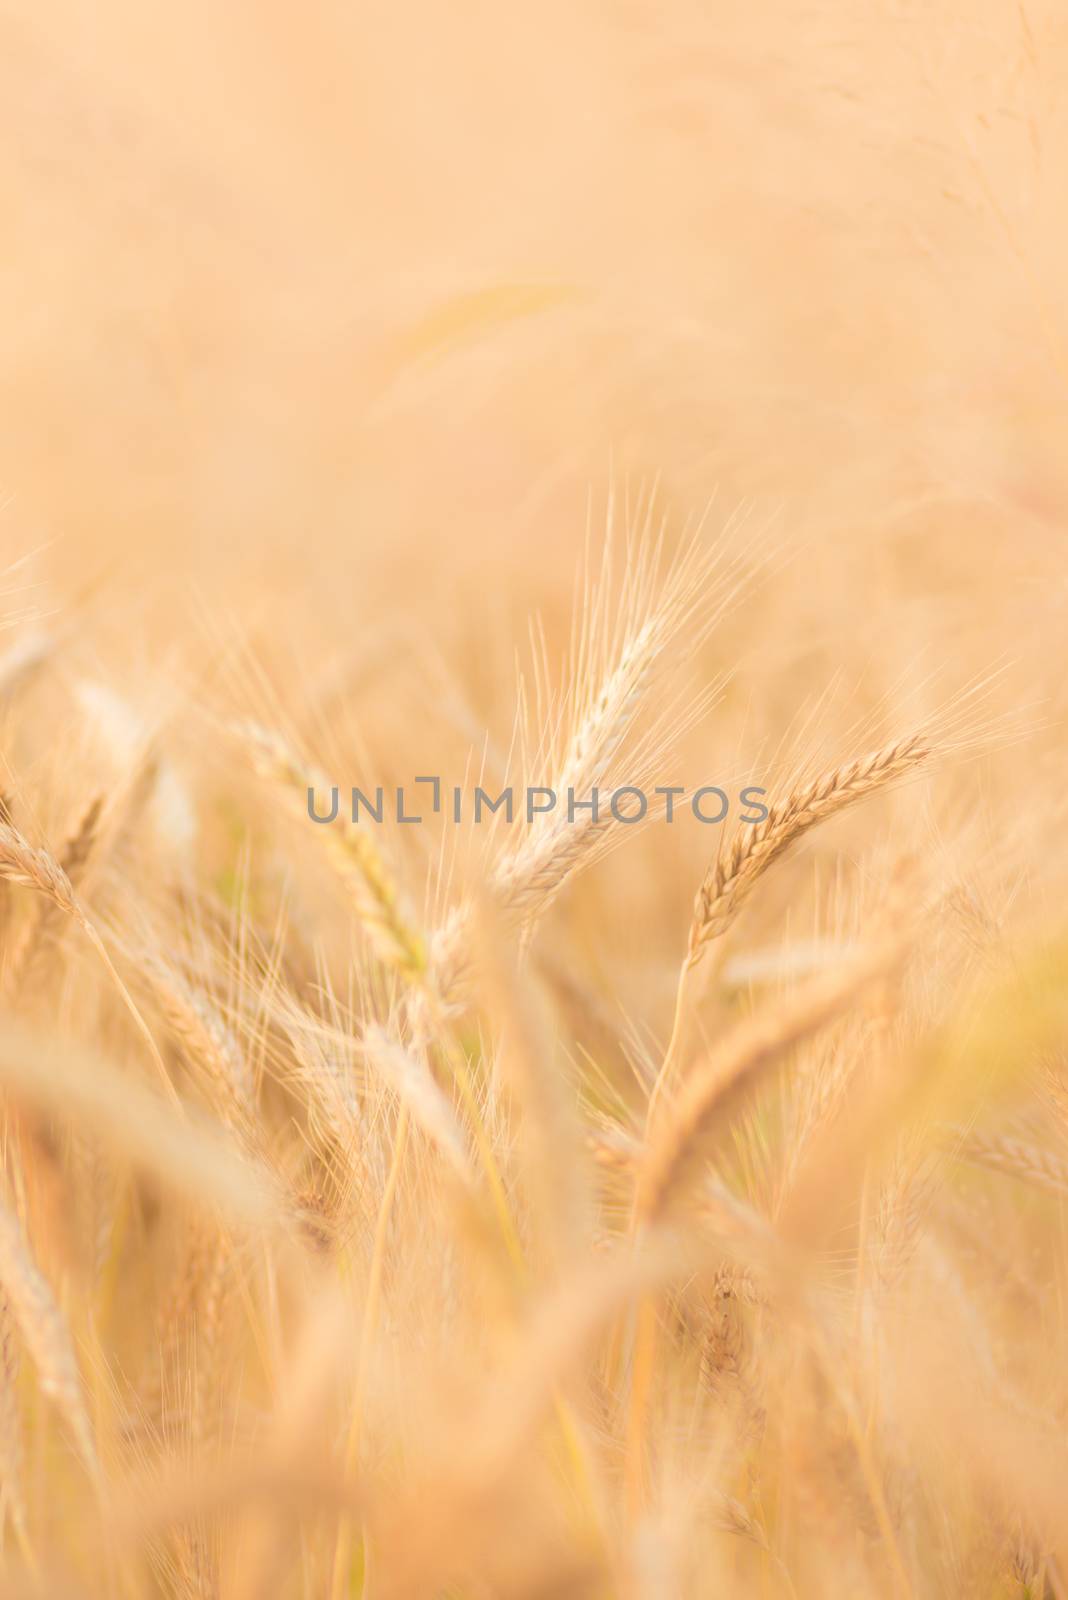 Close up of a wheat ear.